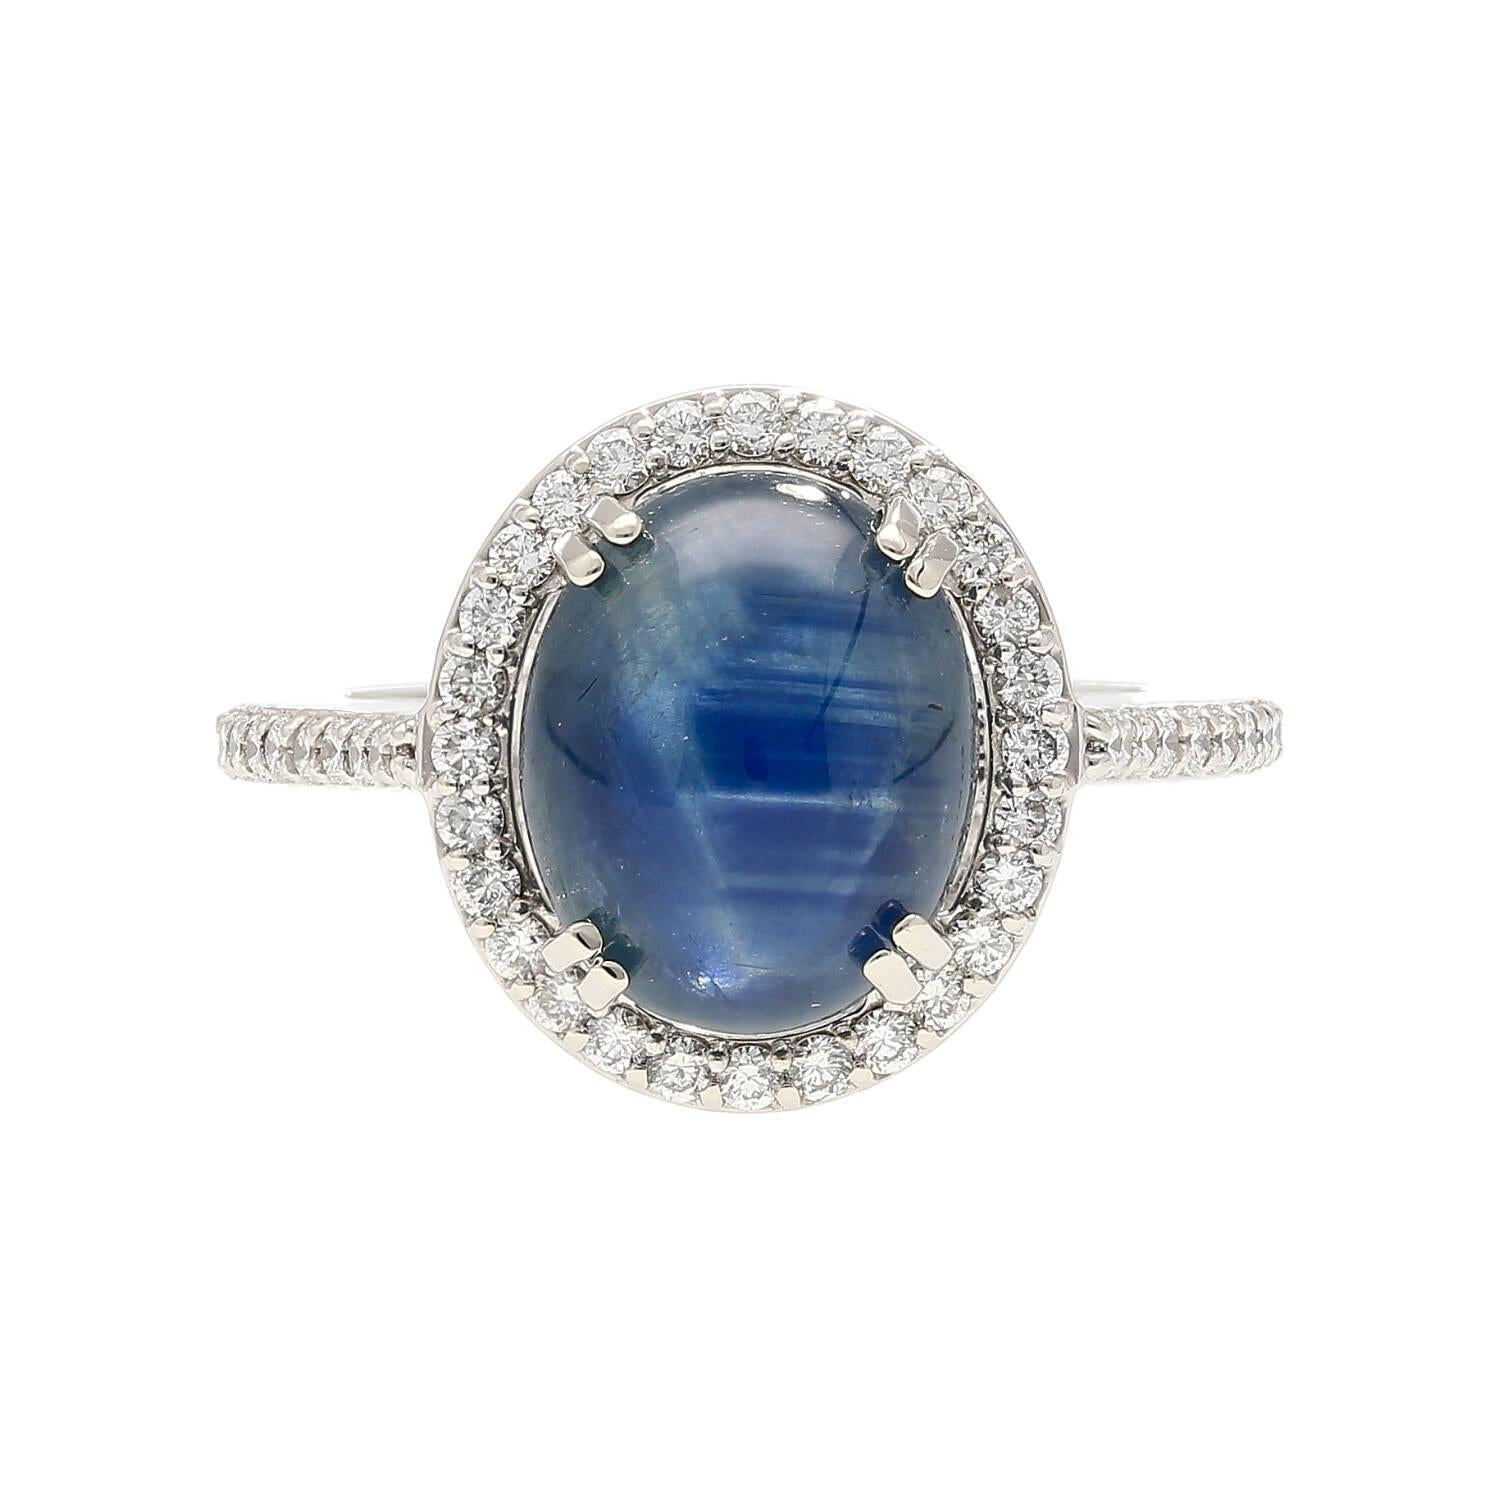 
14K White Gold Ring, weighing 5 grams, meticulously crafted with a prong setting for a timeless appeal.
At the heart of this ring is a mesmerizing 5-carat Round-cut Star Sapphire, radiating a captivating blue hue. Enhancing the allure are two